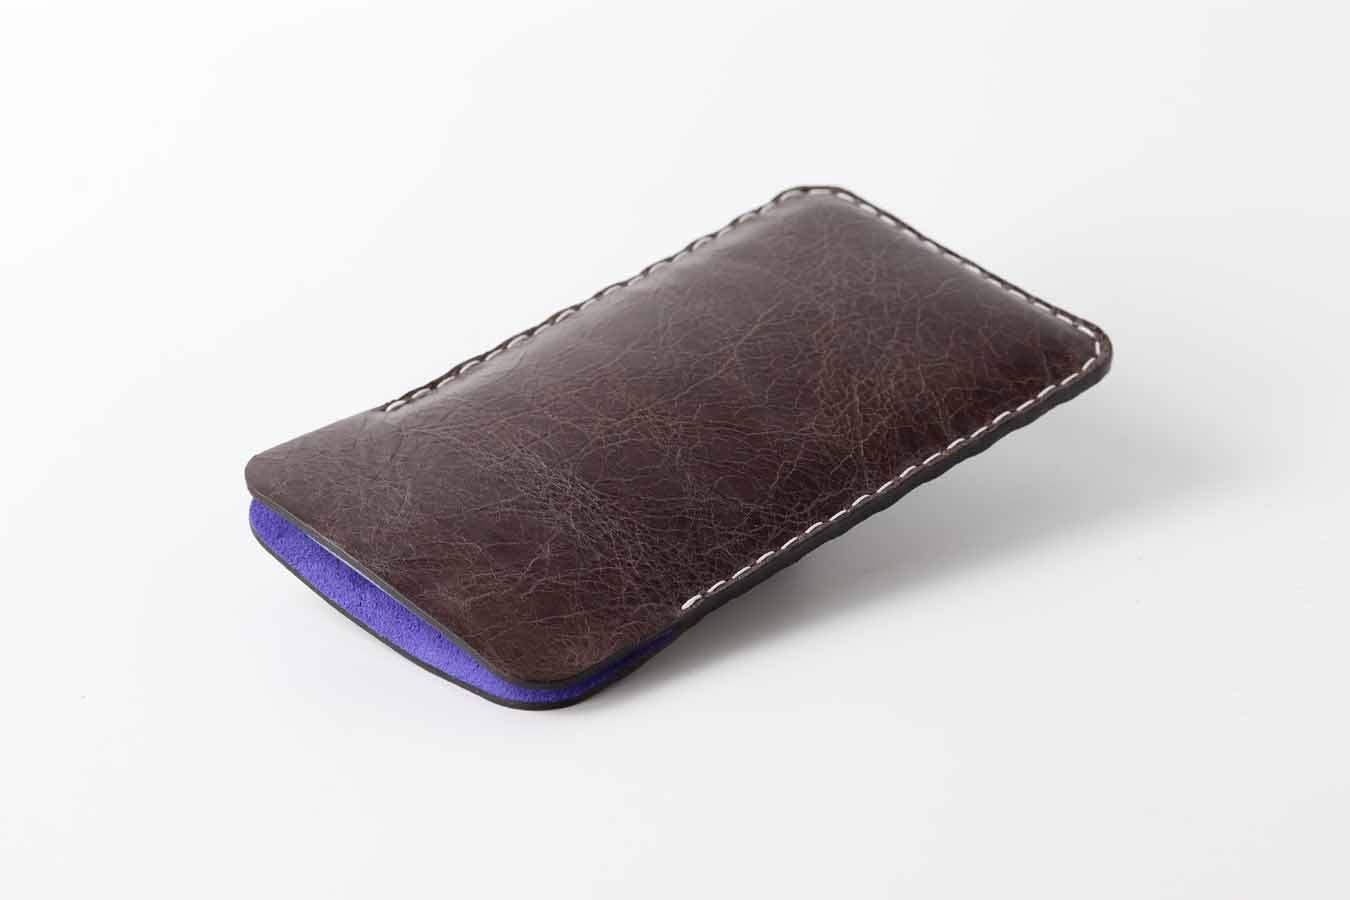 Stylish iPhone 14 13 leather black sleeve with suede lining for protection